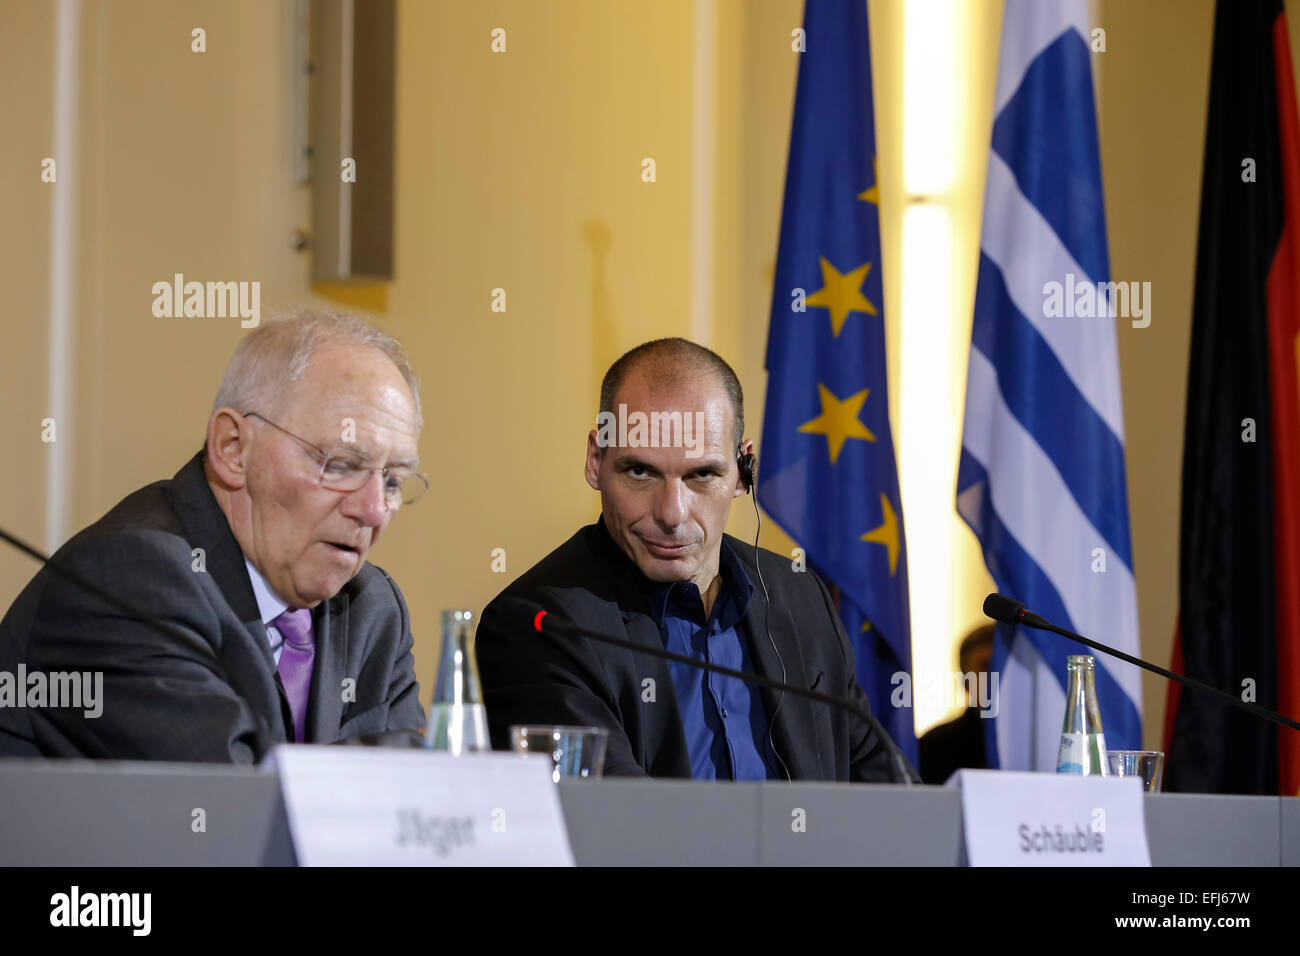 Berlin, Germany. 05th Feb, 2015. Wolfgang Schäuble (CDU), German Minister of Finance, and Yanis Varoufakis, Greek Minister of Finance during press conference after bilateral meeting realized at the German Ministery of Finance  on February 05, 2015 in Berlin, Germany. / Picture: Wolfgang Schäuble (CDU), German Minister of Finance, and Yanis Varoufakis, Greek Minister of Finance during joint press conference in Berlin. © Reynaldo Chaib Paganelli/Alamy Live News Credit:  Reynaldo Chaib Paganelli/Alamy Live News Stock Photo